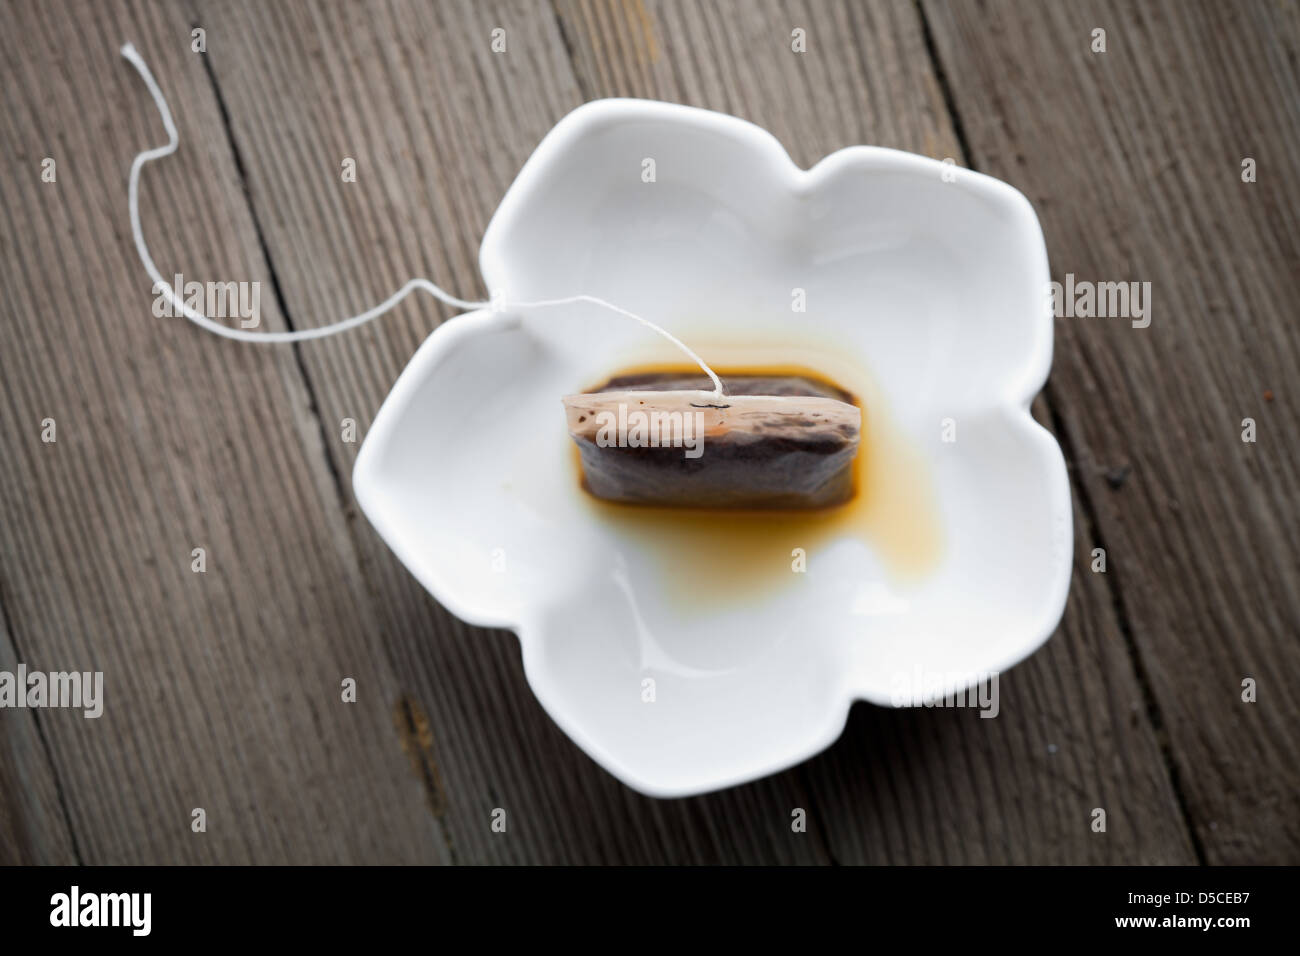 Used tea bag in small white bowl Stock Photo